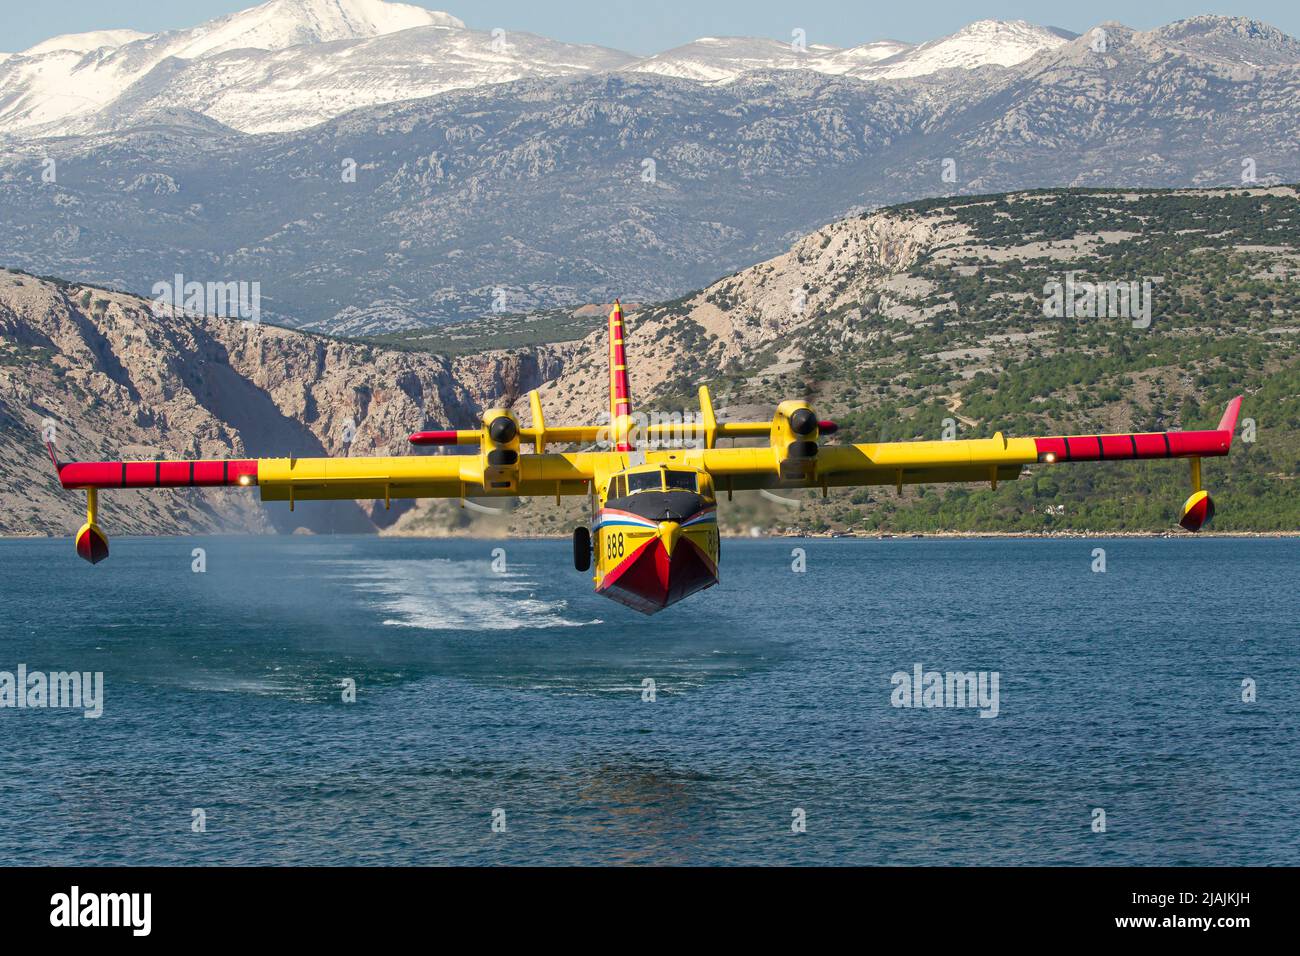 A Croatian Air Force CL-415 Super Scooper firefighting aircraft taking off from the water, Croatia. Stock Photo